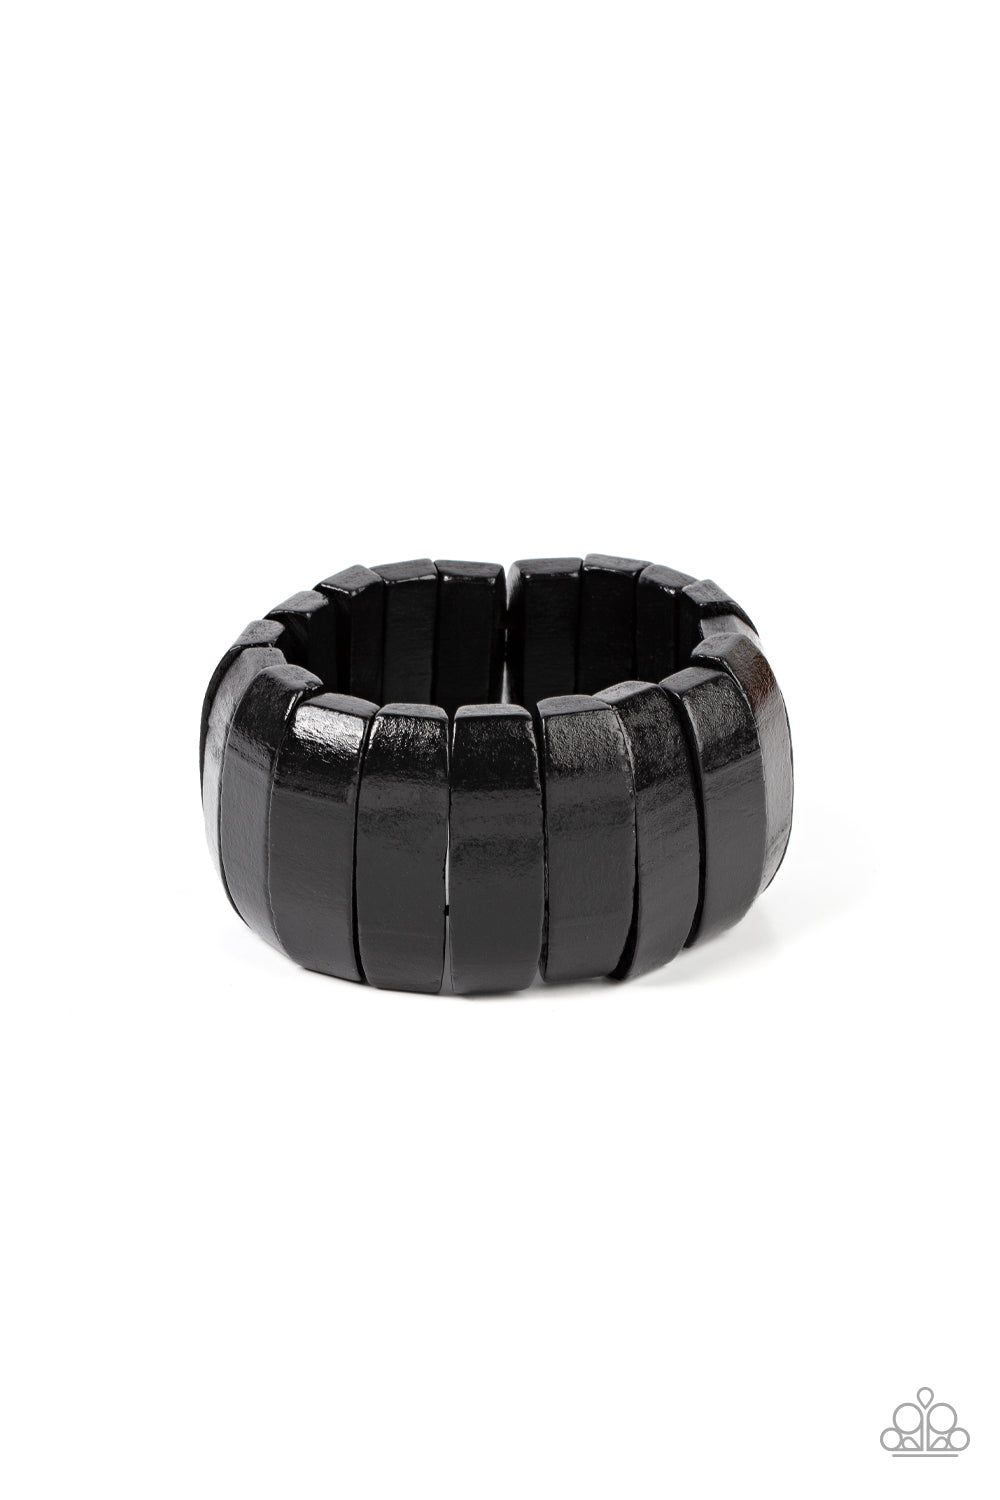 Paparazzi Accessories - Boardwalk Bonanza - Black Wood Bracelets smooth black wooden panels are threaded along stretchy bands to create a tropical vibe as they fall around the wrist.  Sold as one individual bracelet.